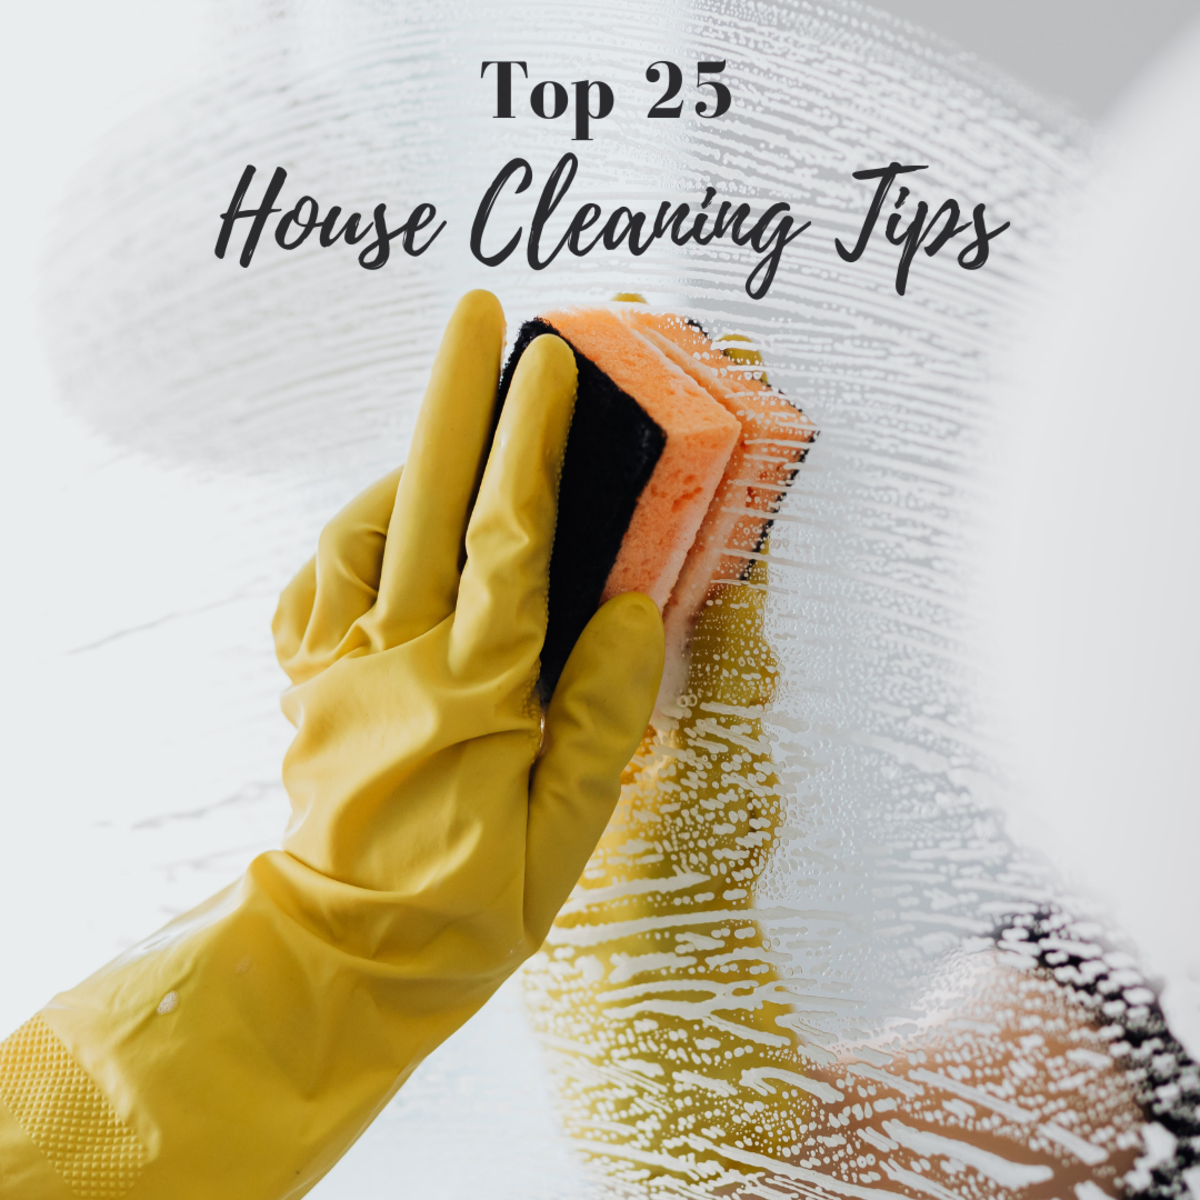 Hate housekeeping? Here are some tips to make your life easier!